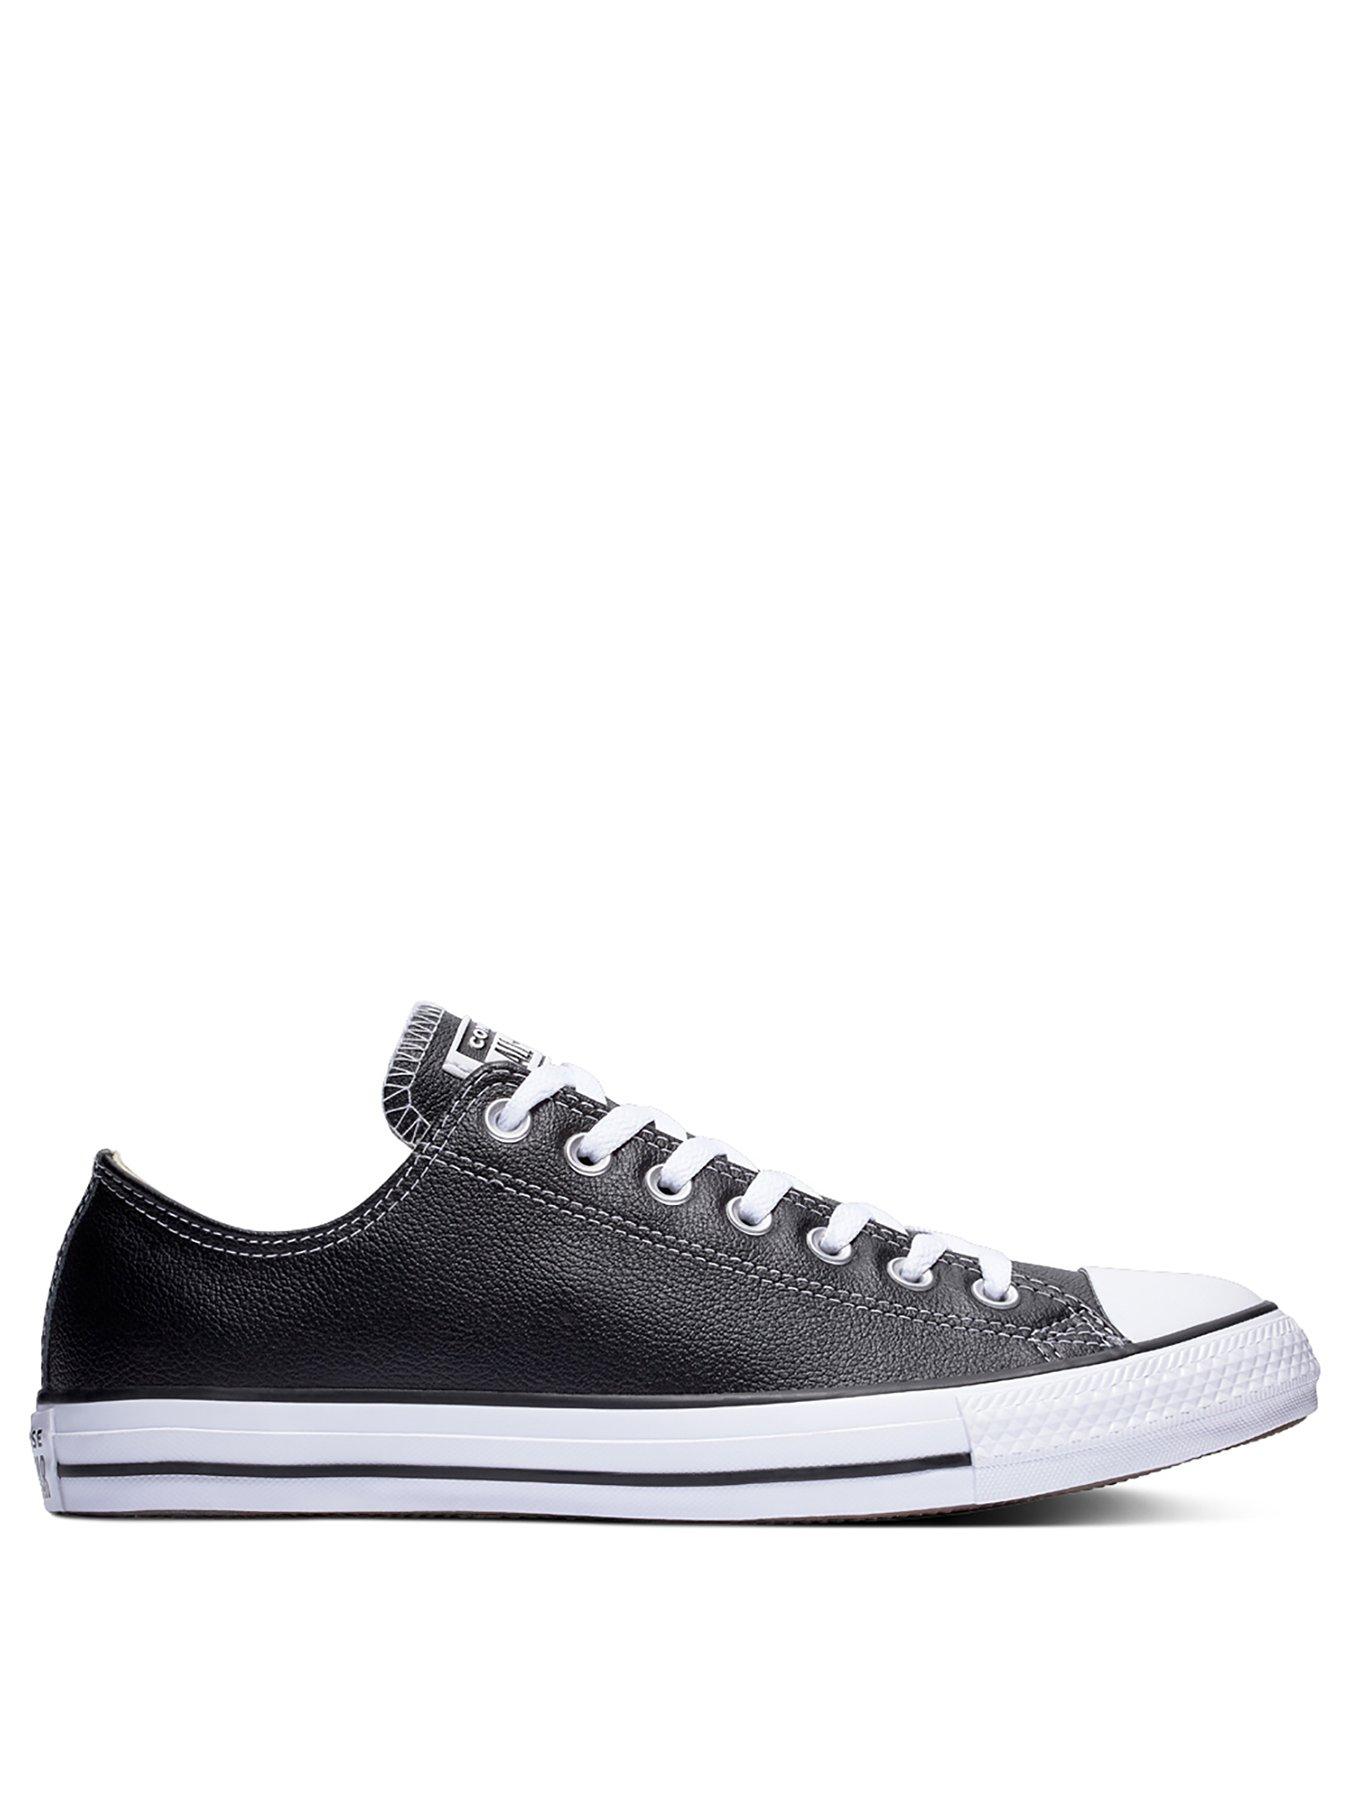 converse chuck taylor leather ox white